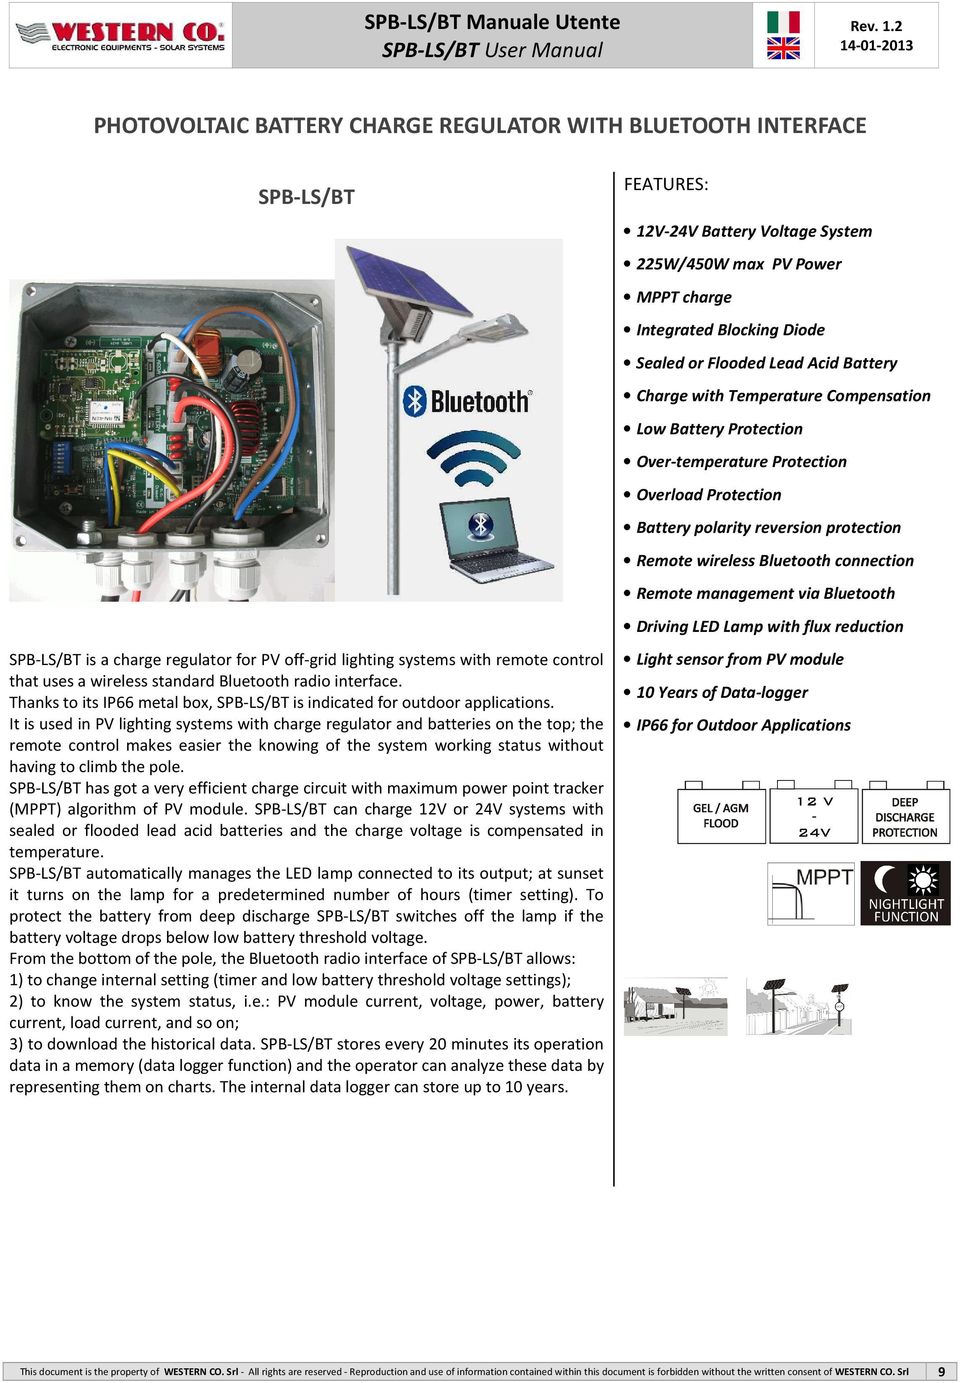 Bluetooth connection Remote management via Bluetooth Driving LED Lamp with flux reduction SPB-LS/BT is a charge regulator for PV off-grid lighting systems with remote control that uses a wireless